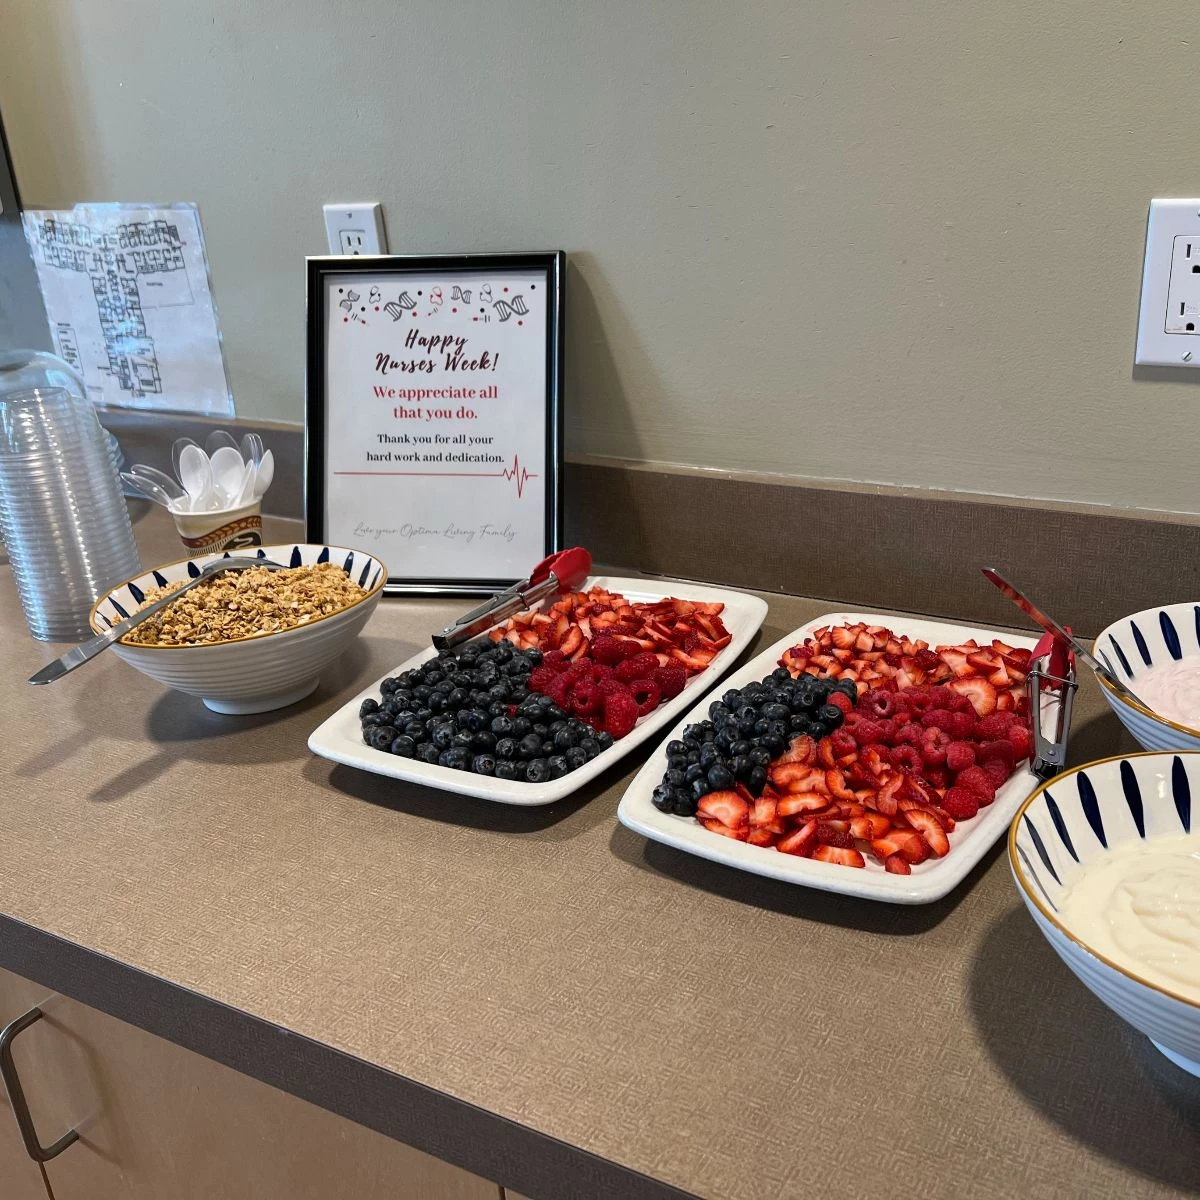 Some platters of fruit along with yogurt and granola available to be served. Behind is a sign that says, 